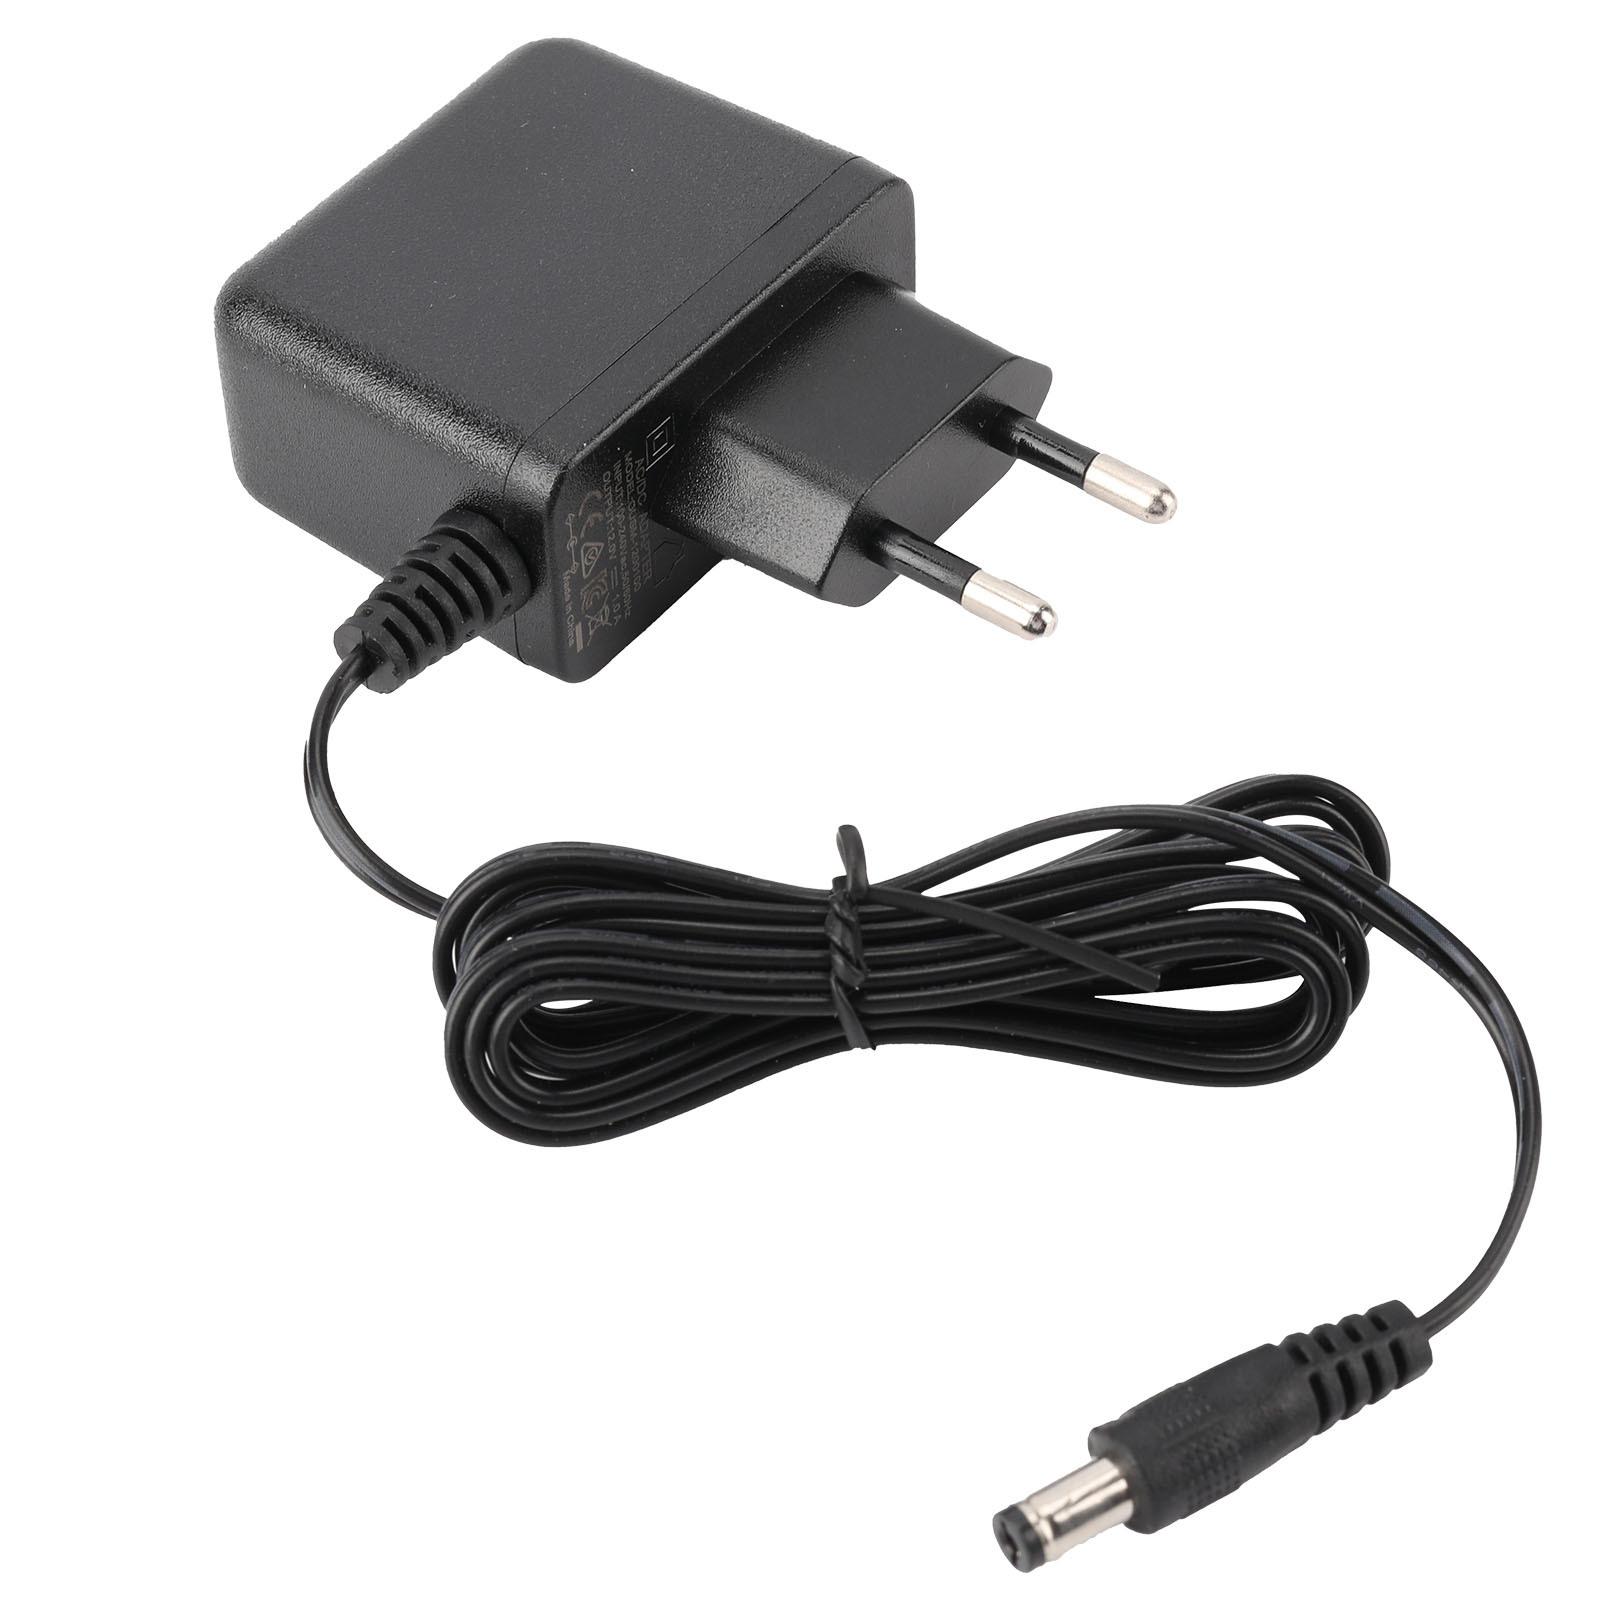 black universal AC to DC 12V 1A 12W power adapter with 2 pin european wall plug, power cord and male barrel connector